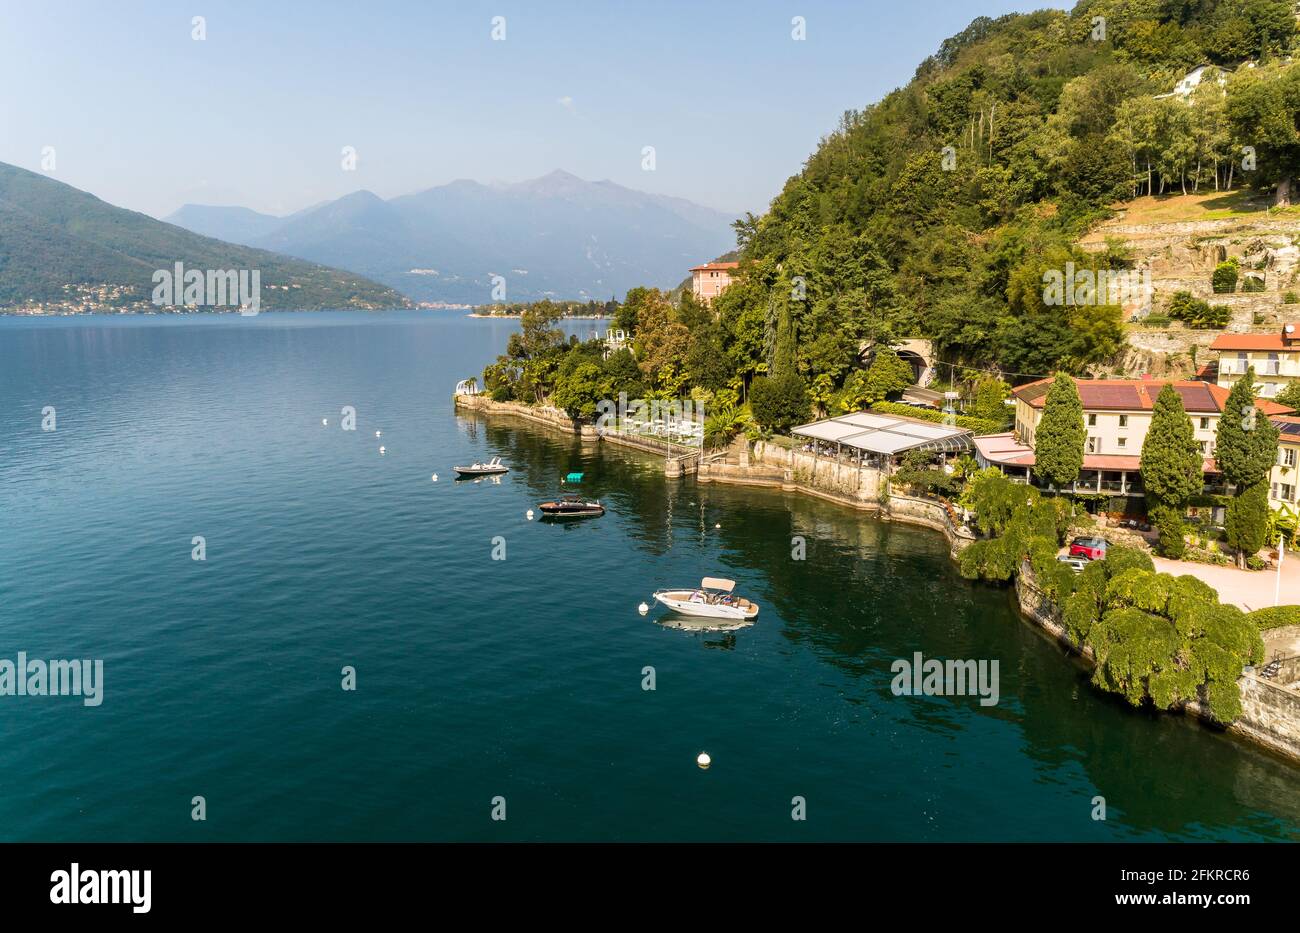 Aerial landscape of Lake Maggiore in a sunny day from the Colmegna lakeside, municipality of Luino, Italy Stock Photo